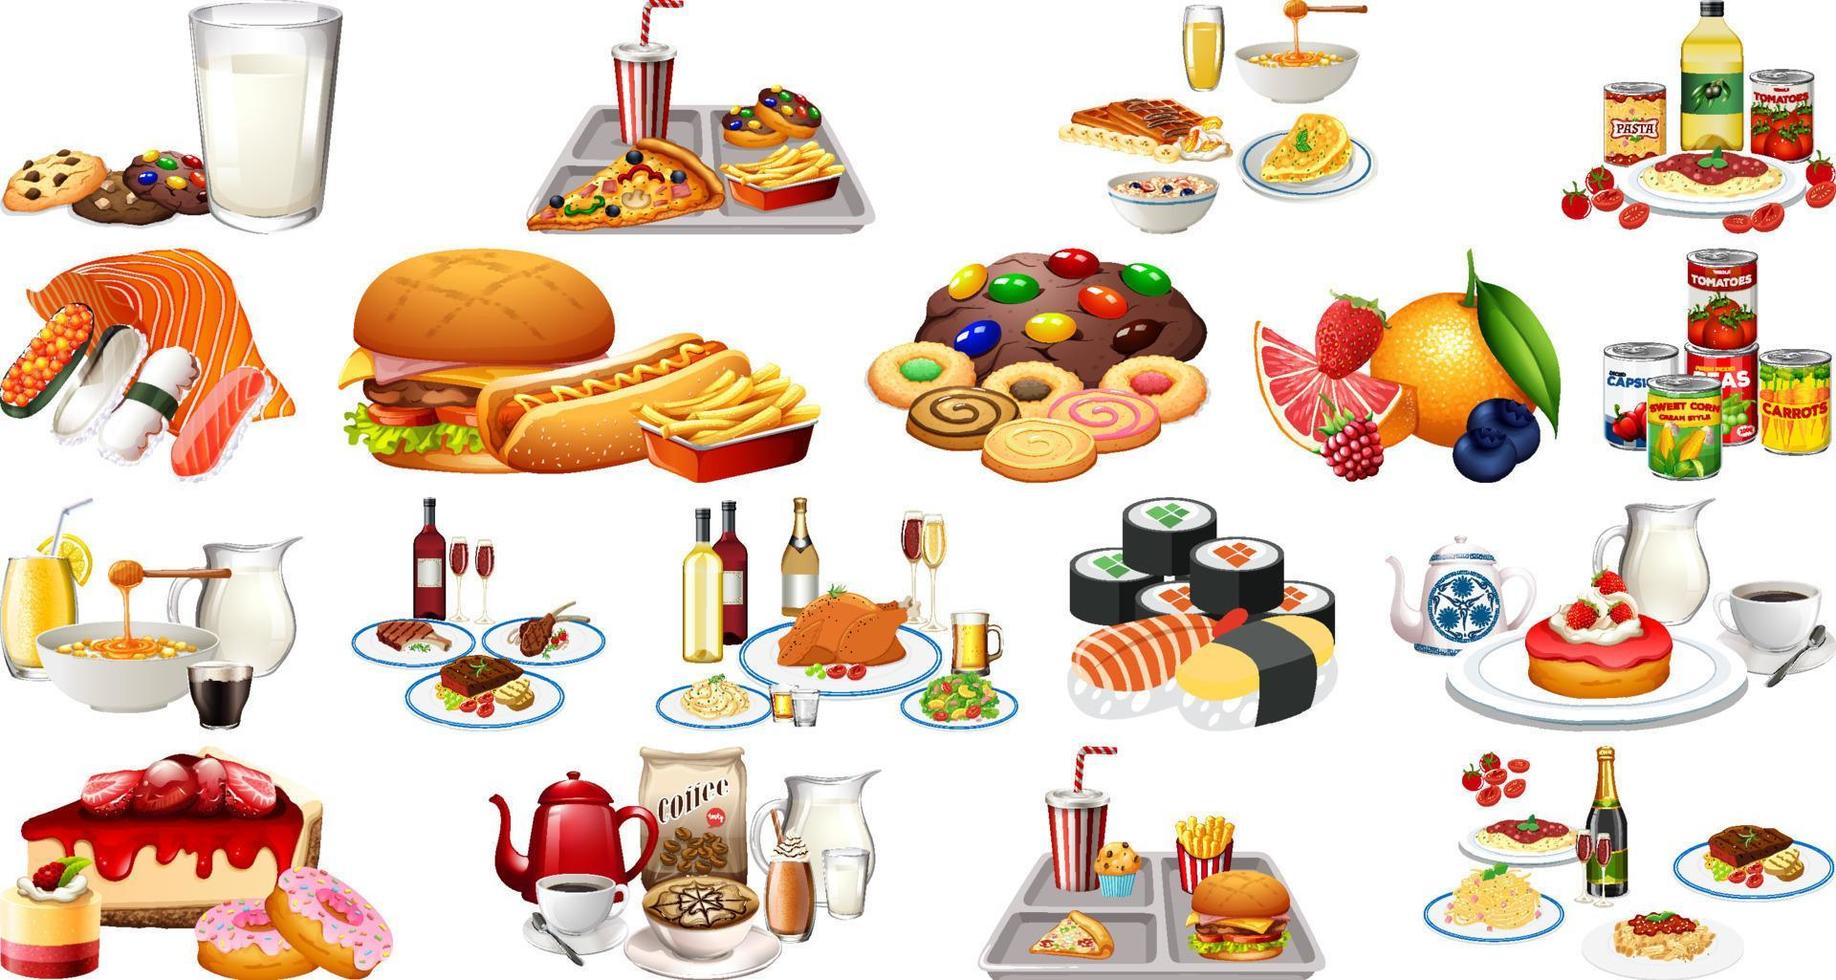 Foods and beverages set vector